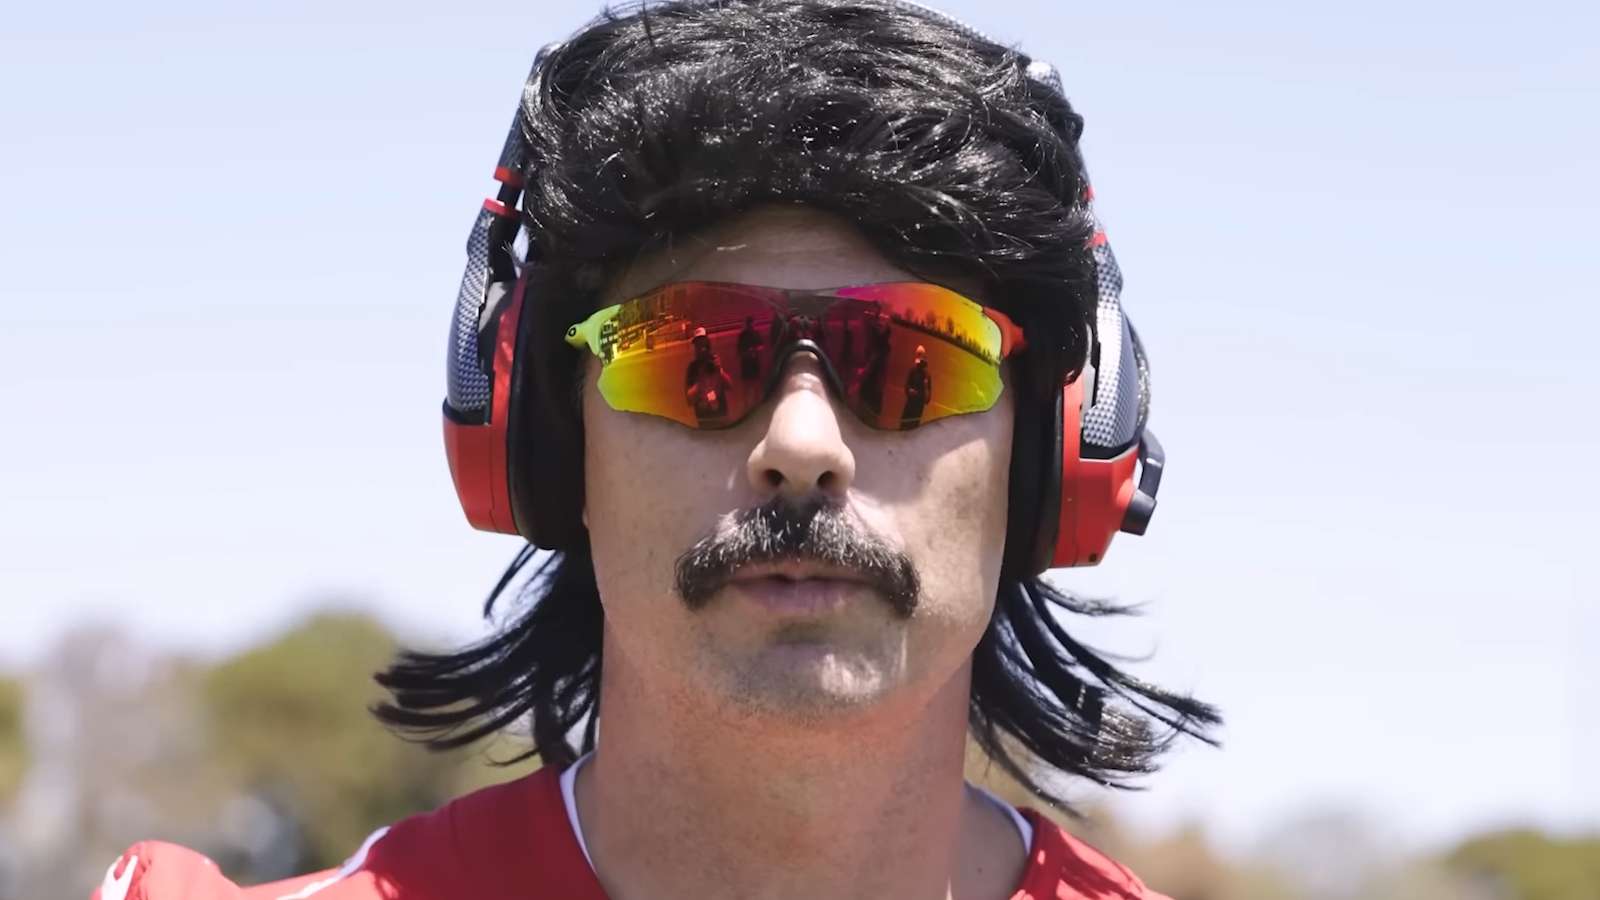 Dr Disrespect in American Football video at San Francisco 49ers training camp.